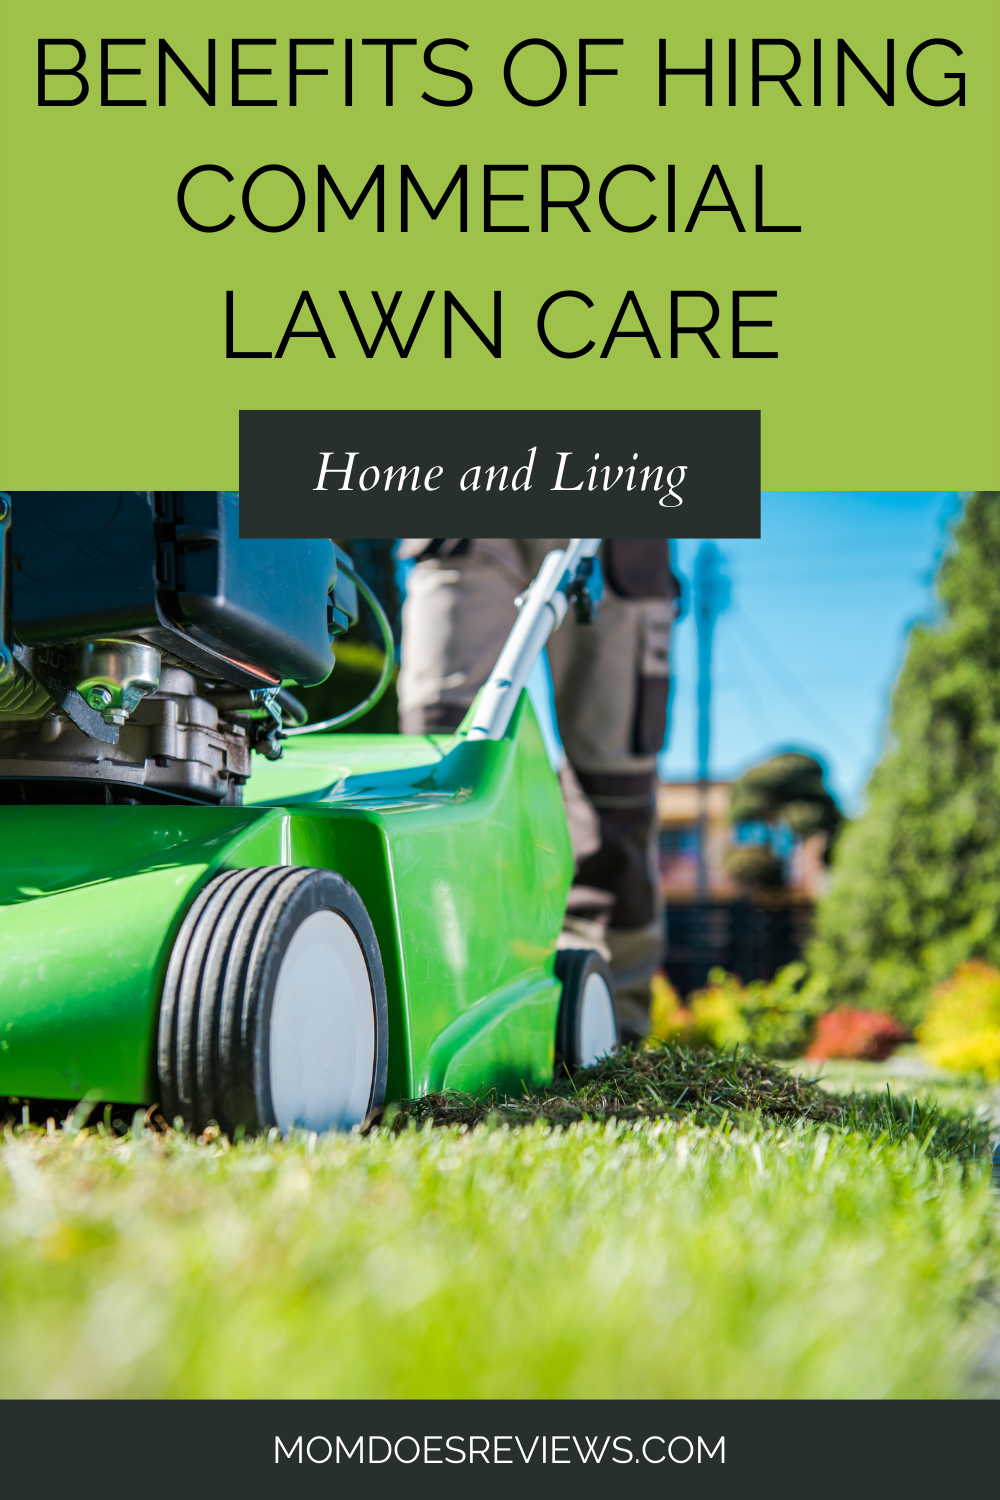 Benefits of Hiring a Commercial Lawn Care